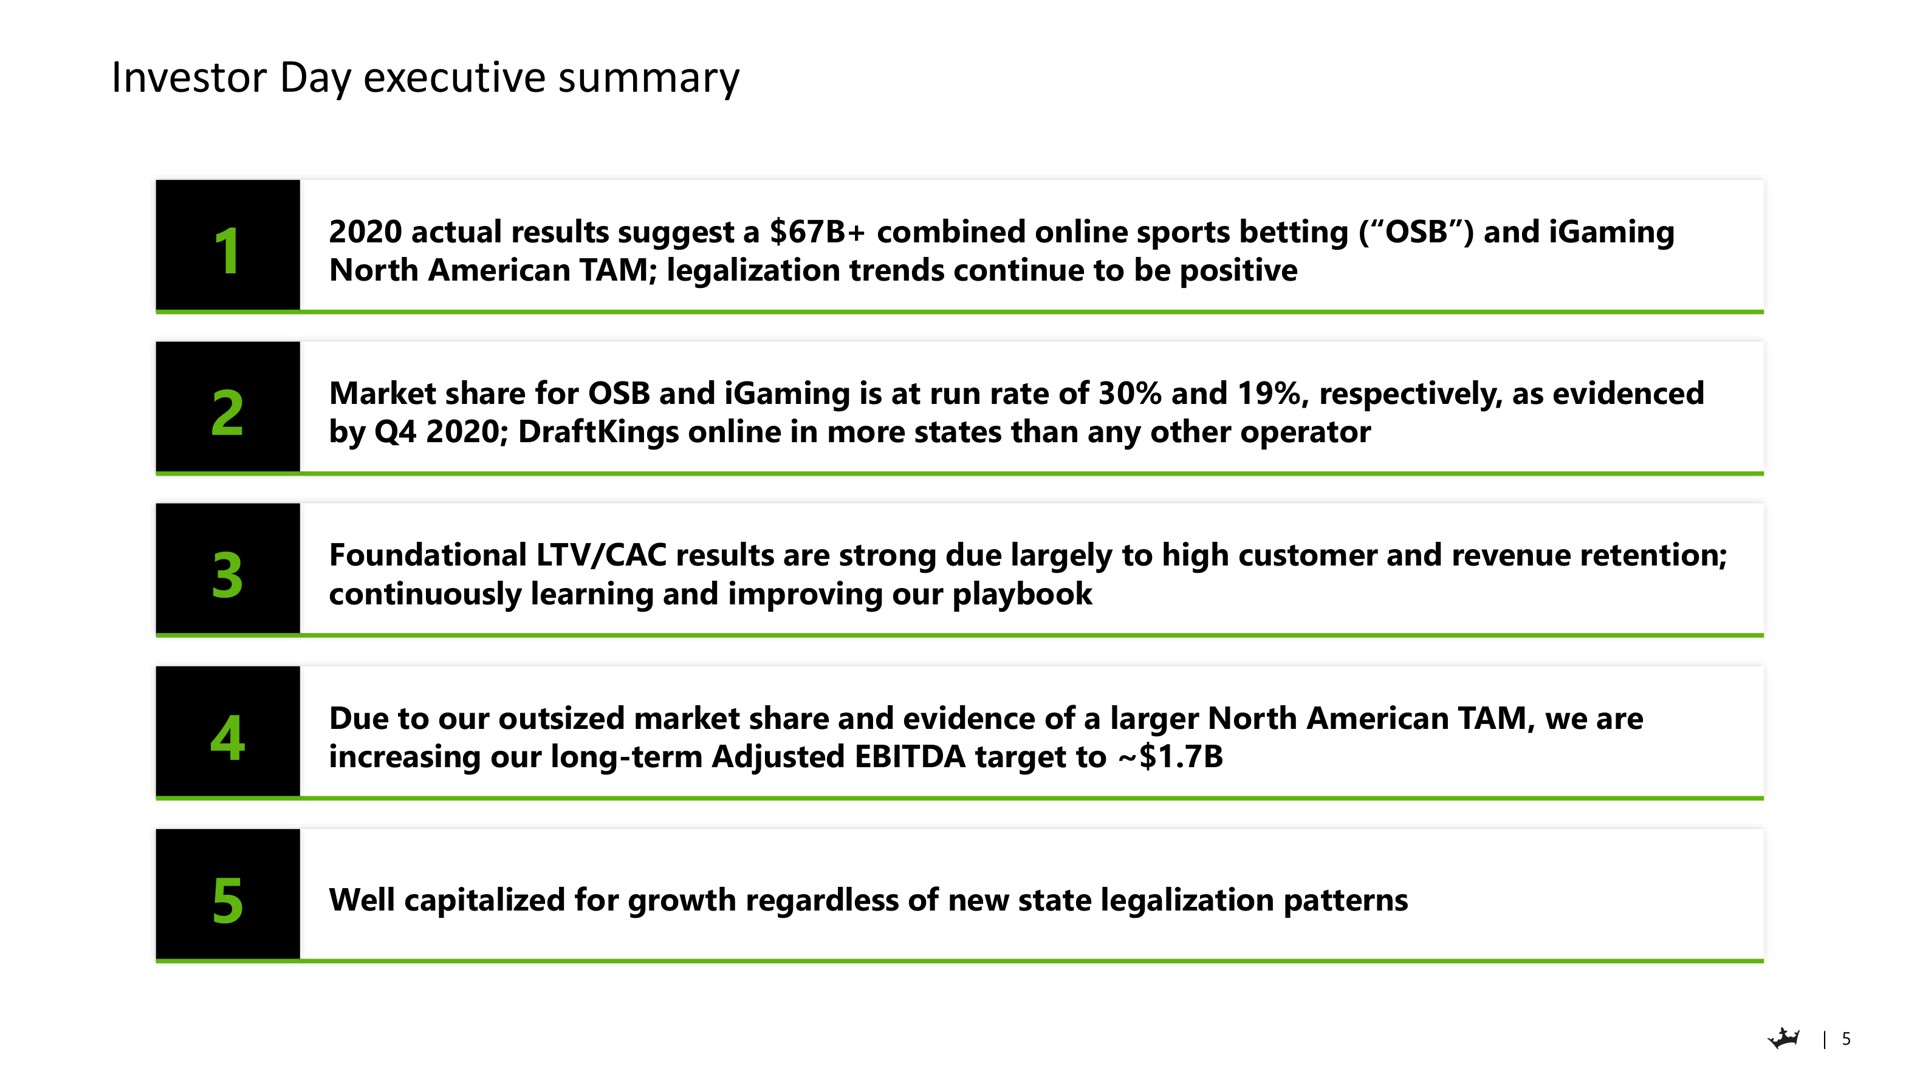 investor day executive summary | DraftKings